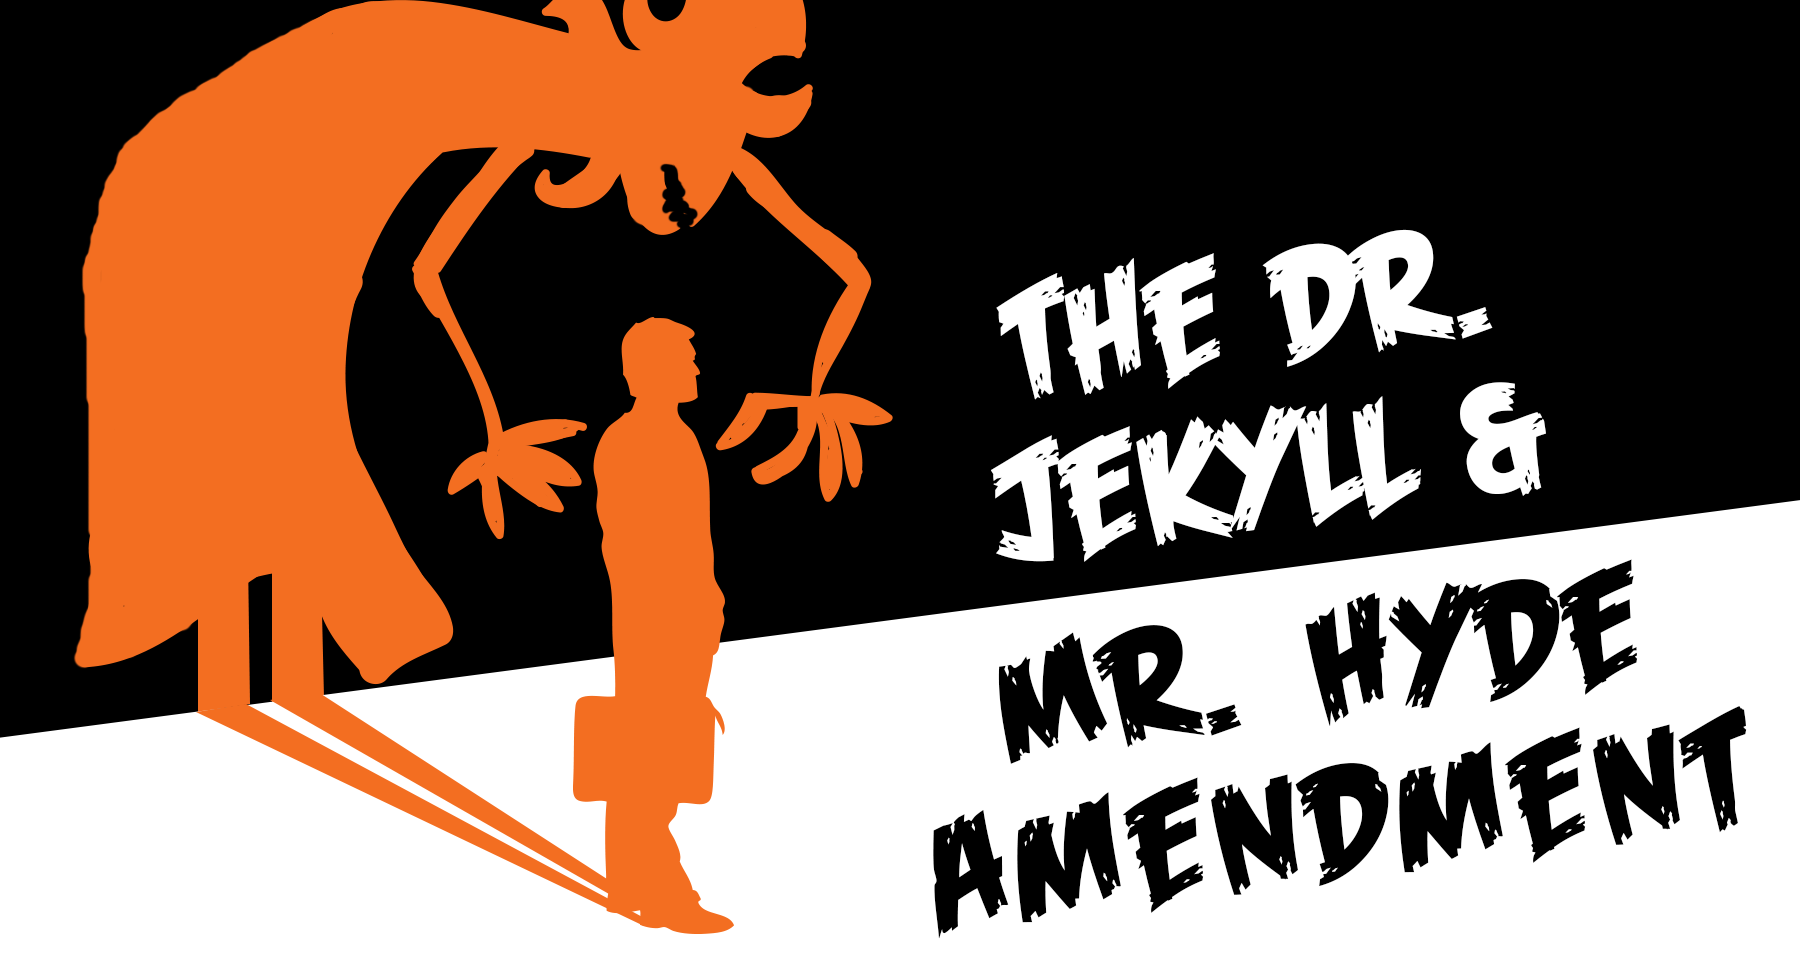 Yikes! The “Dr. Jekyll & My. Hyde Amendment” is the scariest policy on Capitol Hill right now!